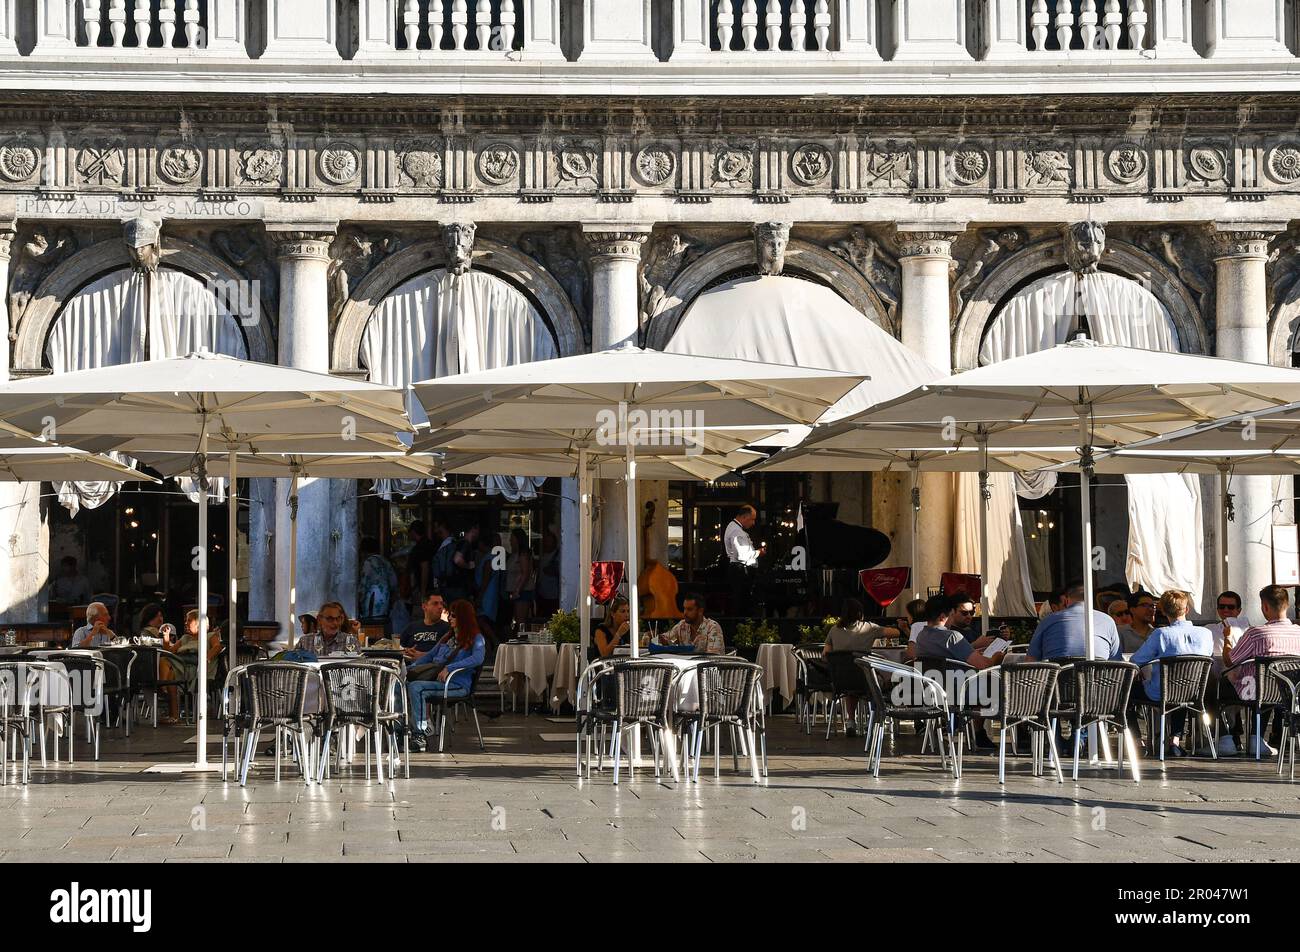 Exterior of the famous Caffè Florian, established in 1720 in St Mark's Square, one of the oldest coffee house in the world, Venice, Veneto, Italy Stock Photo